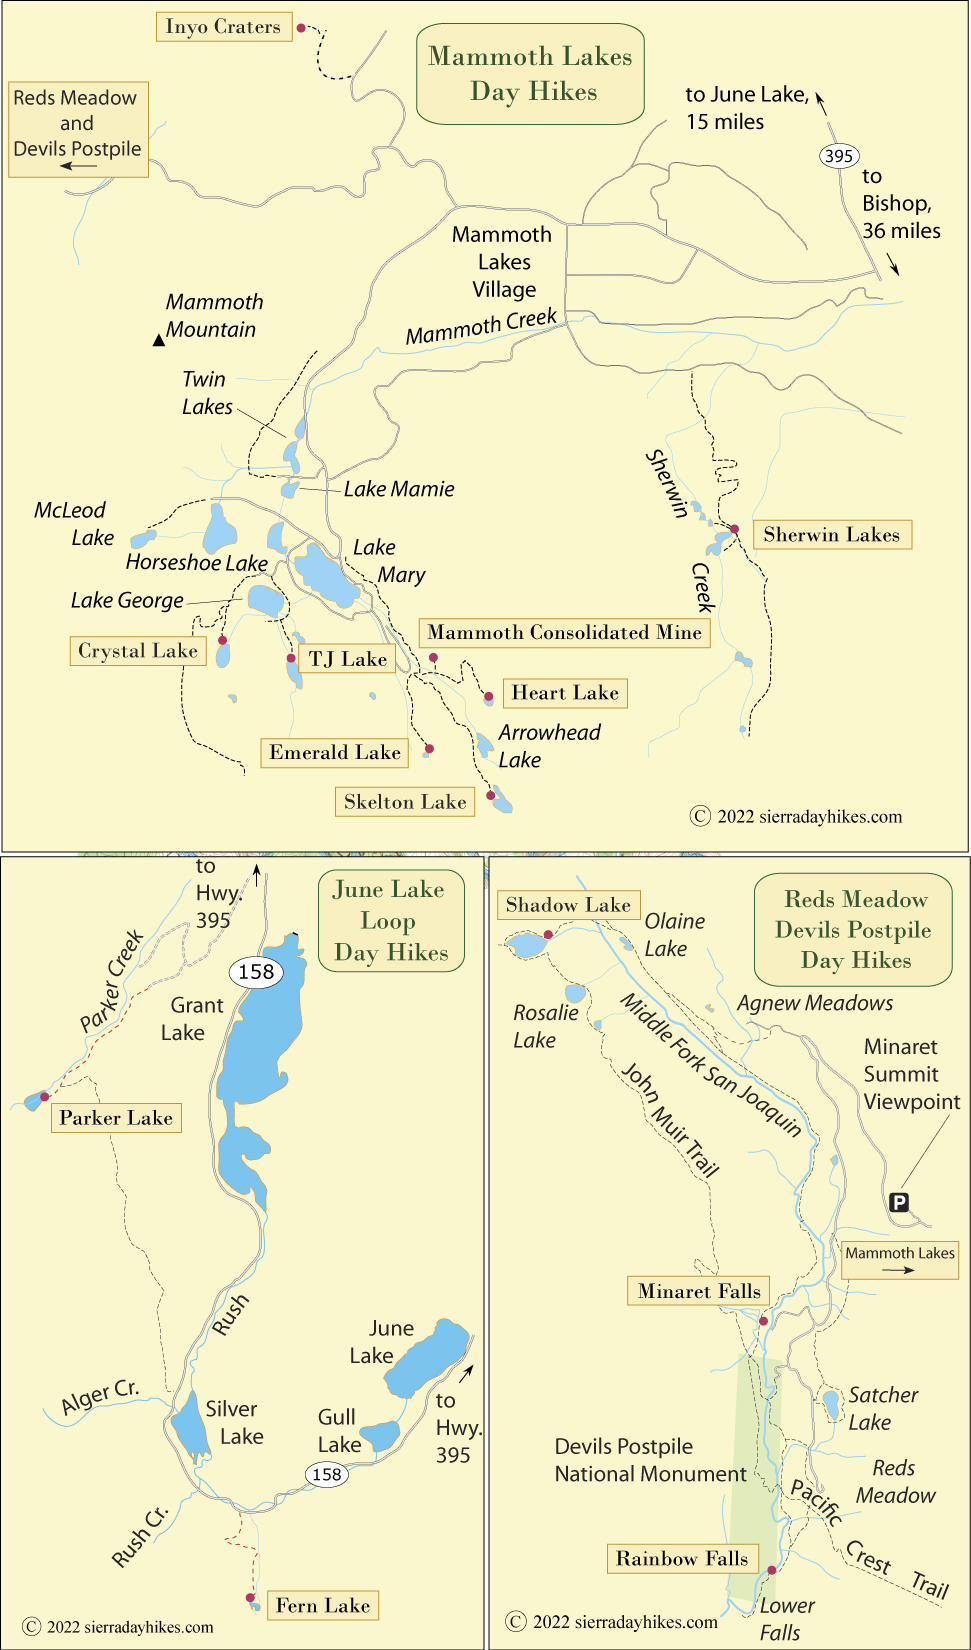 Day Hikes maps for Mammoth Lakes, June Lakes Loop and Reds Meadow, California